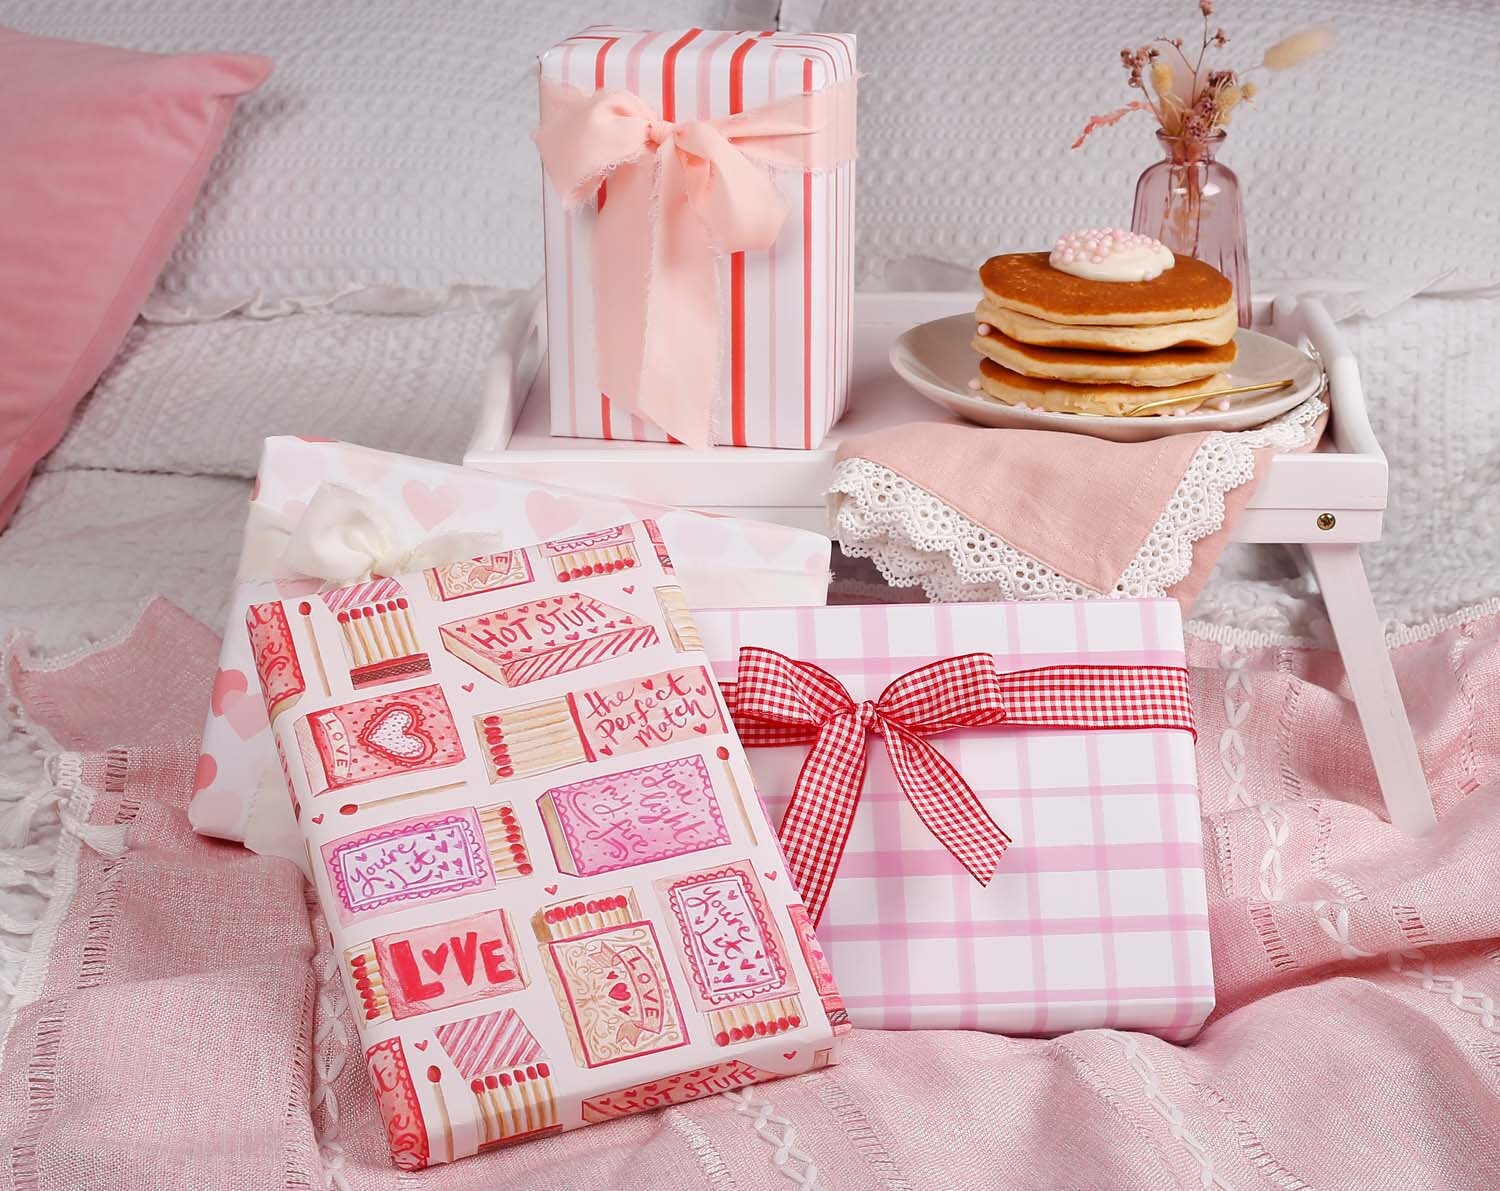 a pink and white checkered wrapping paper with a red ribbon